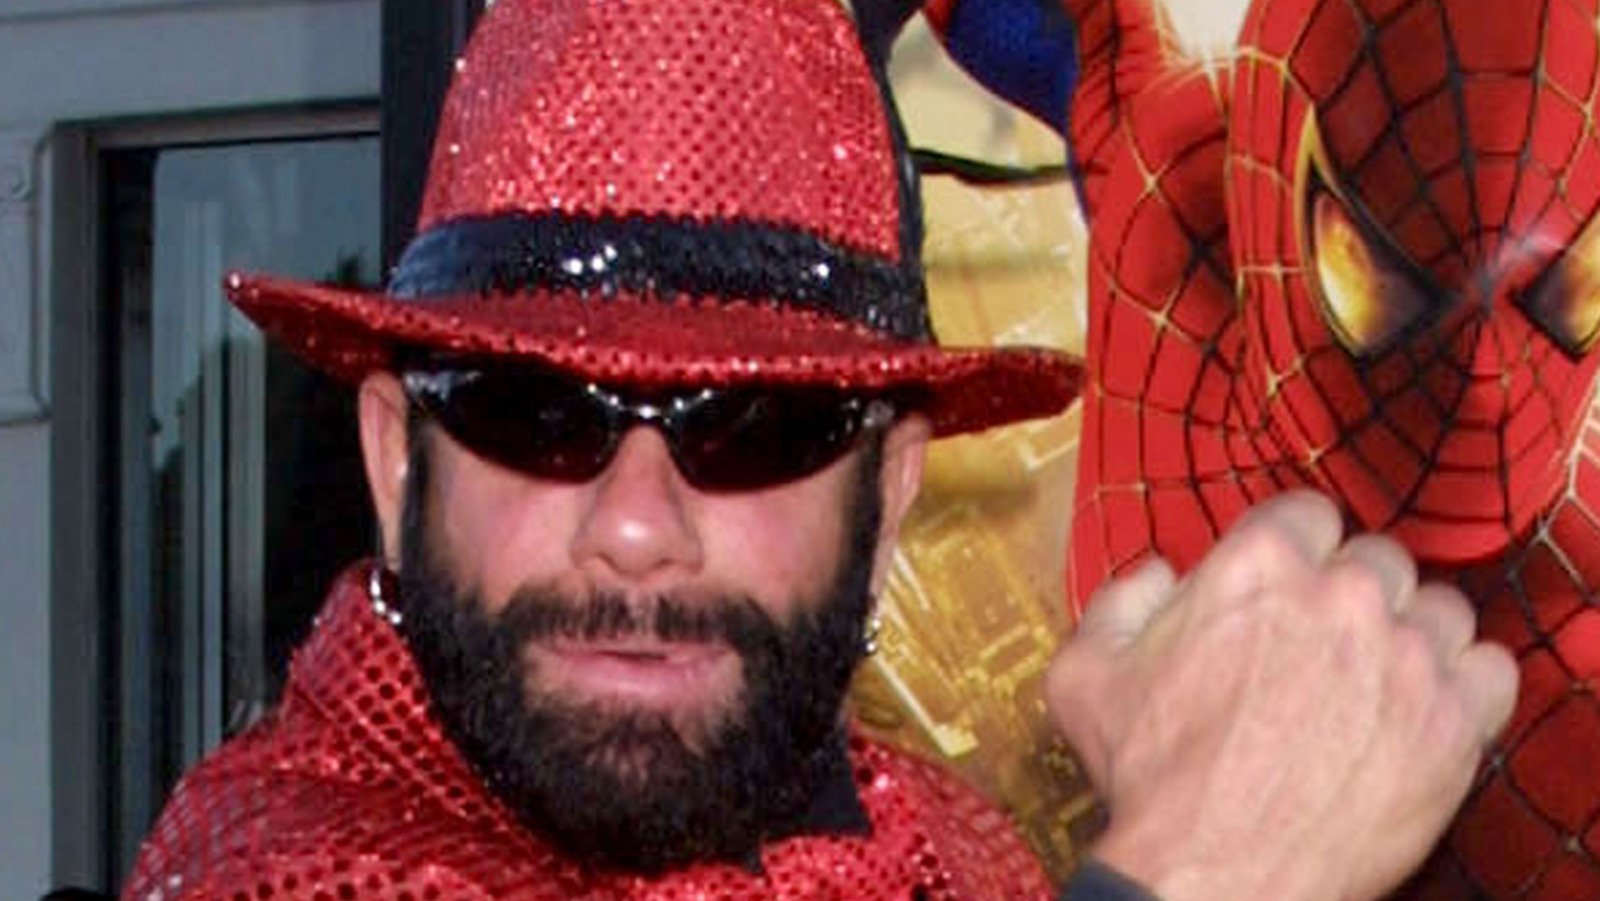 Macho Man Randy Savage from The Diamond to The Ring